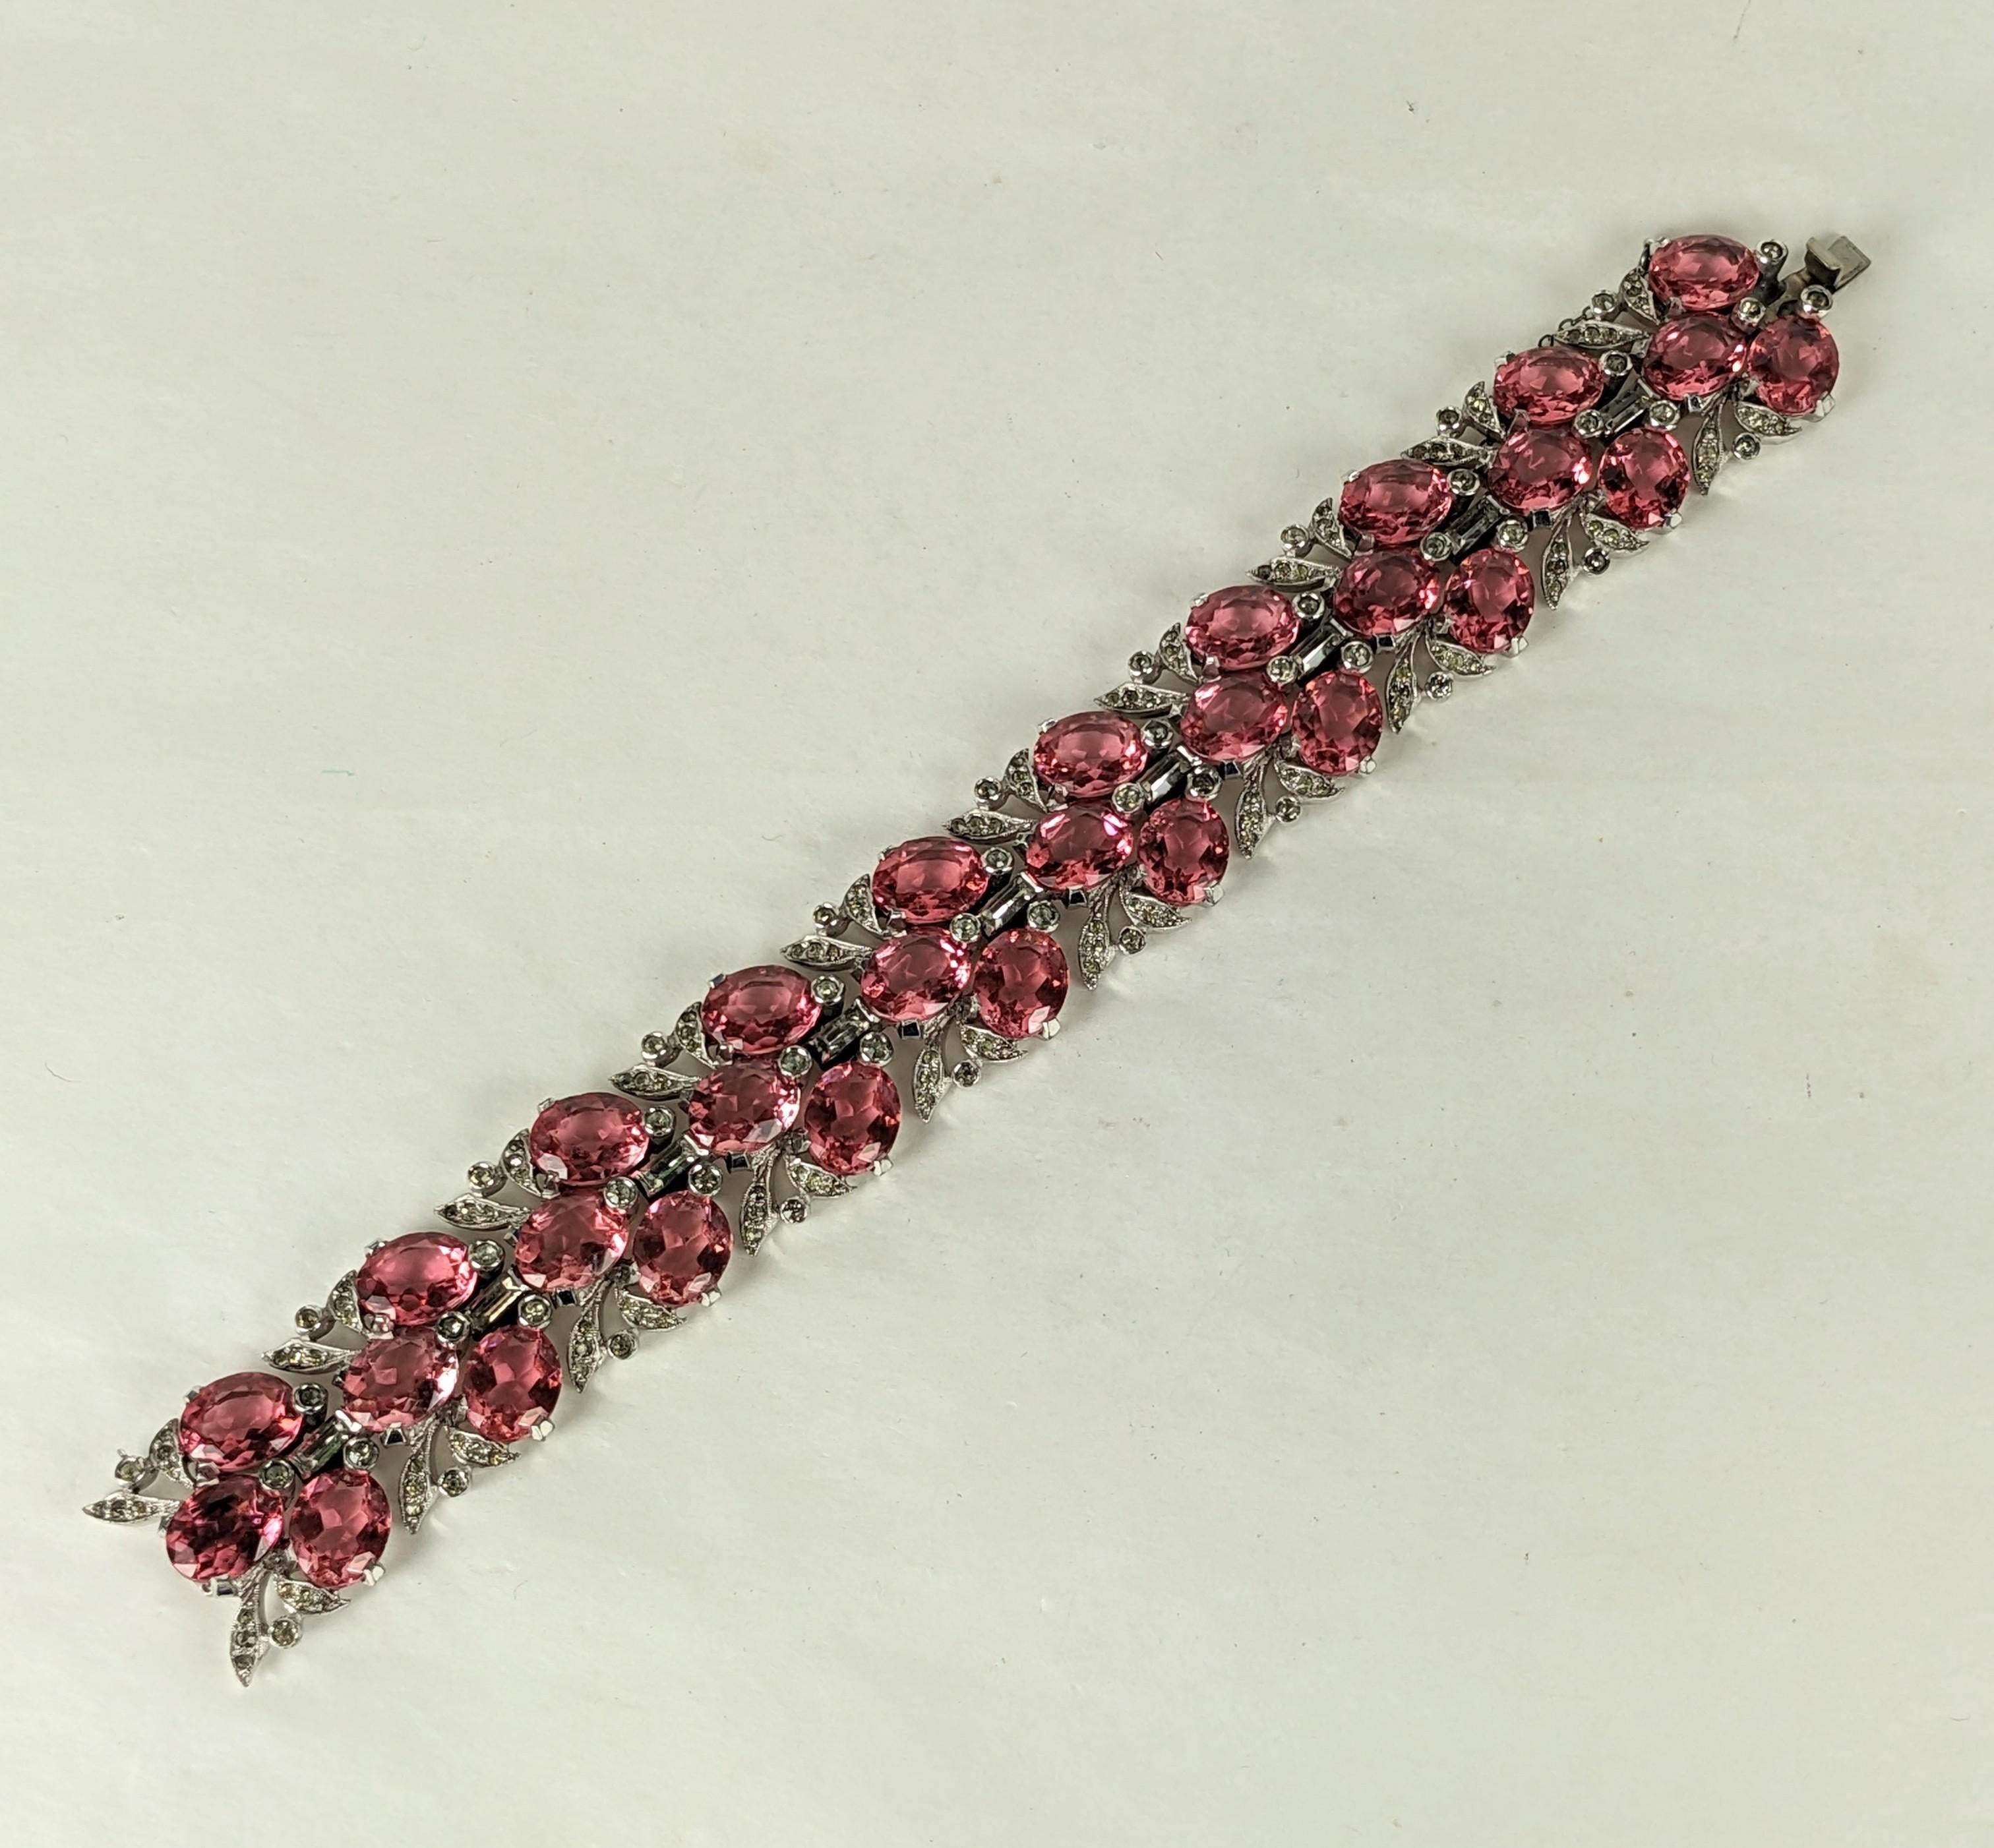 Elegant Art Deco Mazer Pink Wide Bracelet from the 1930's. Pink oval pastes are set within delicate pave leaves in this articulated period bracelet. 
Unsigned. 7